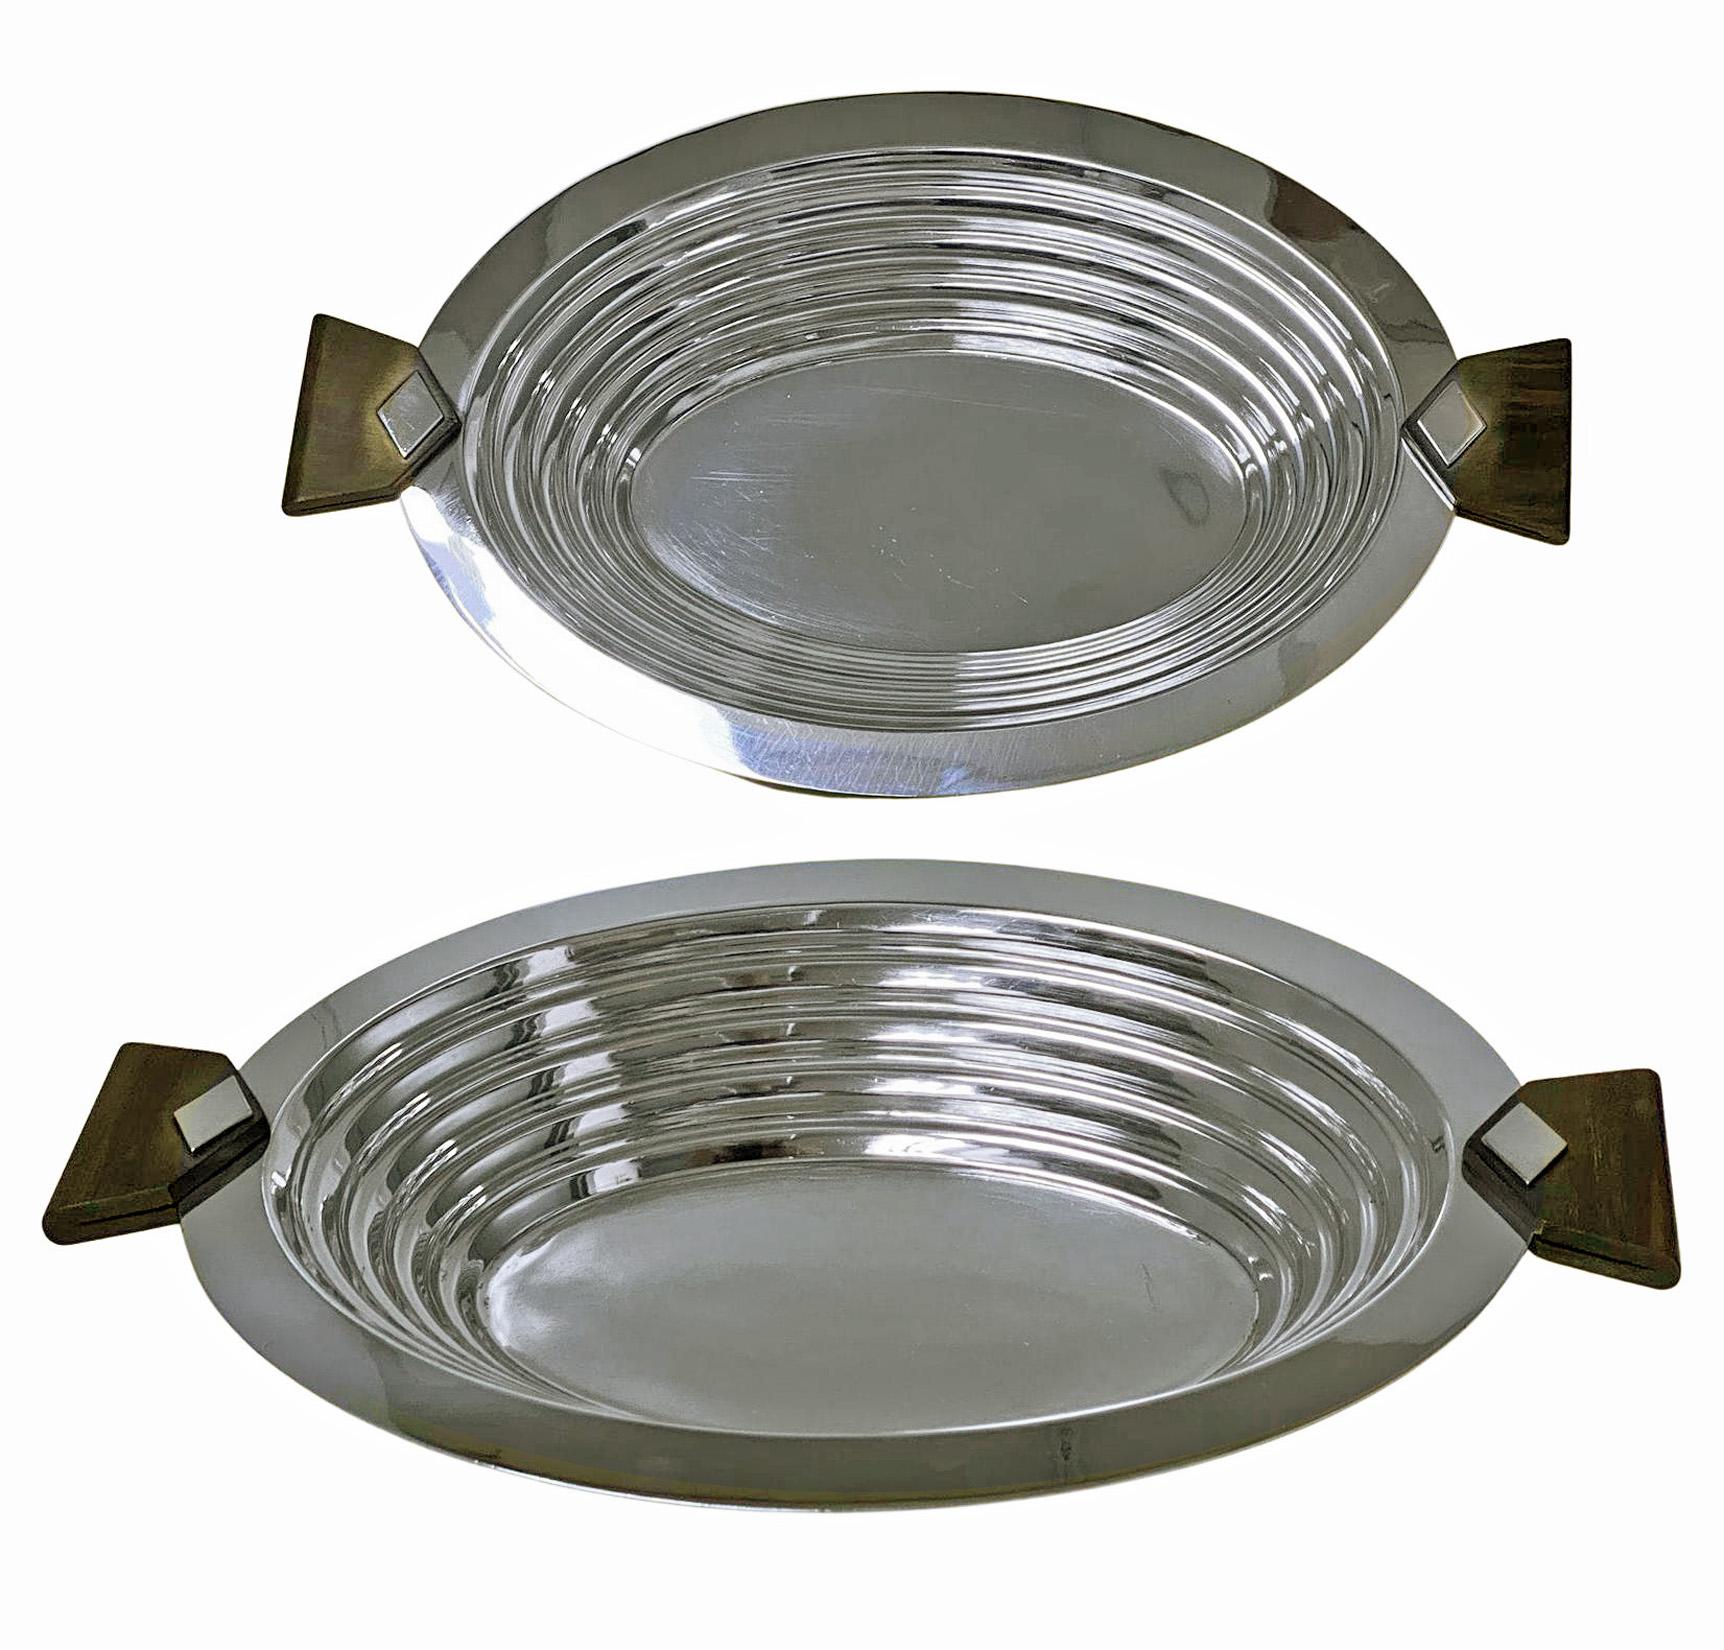 Pair of Christofle Art Deco silver plate and wood serving dishes France C.1930. Luc Lanel Ondulations design, oval shape with integral wood handles. Measure: 15.00 x 9.25 x 2.25 inches. Each piece fully marked to undersides Christofle and the knight